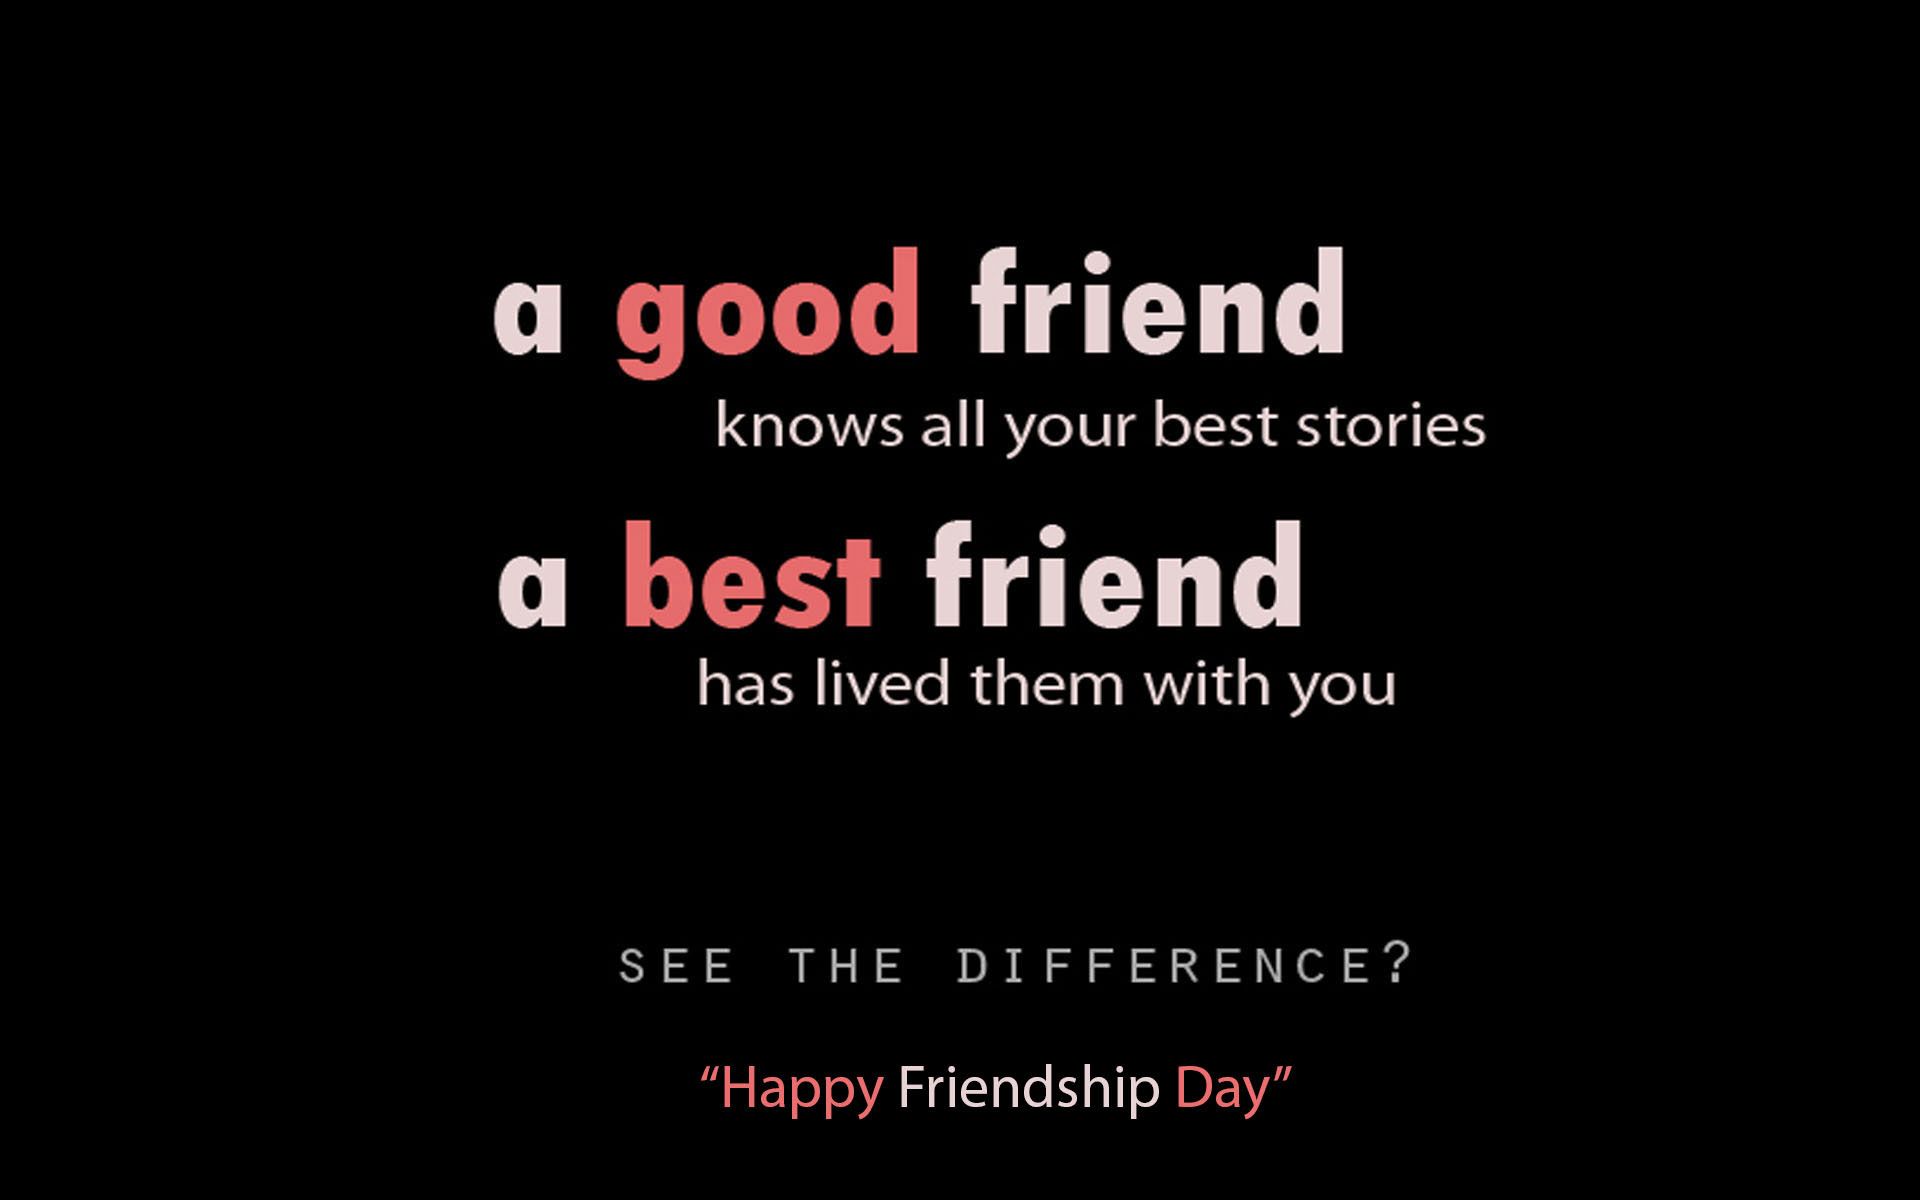 Happy Friendship Day Wallpaper with Quotes. Friendship